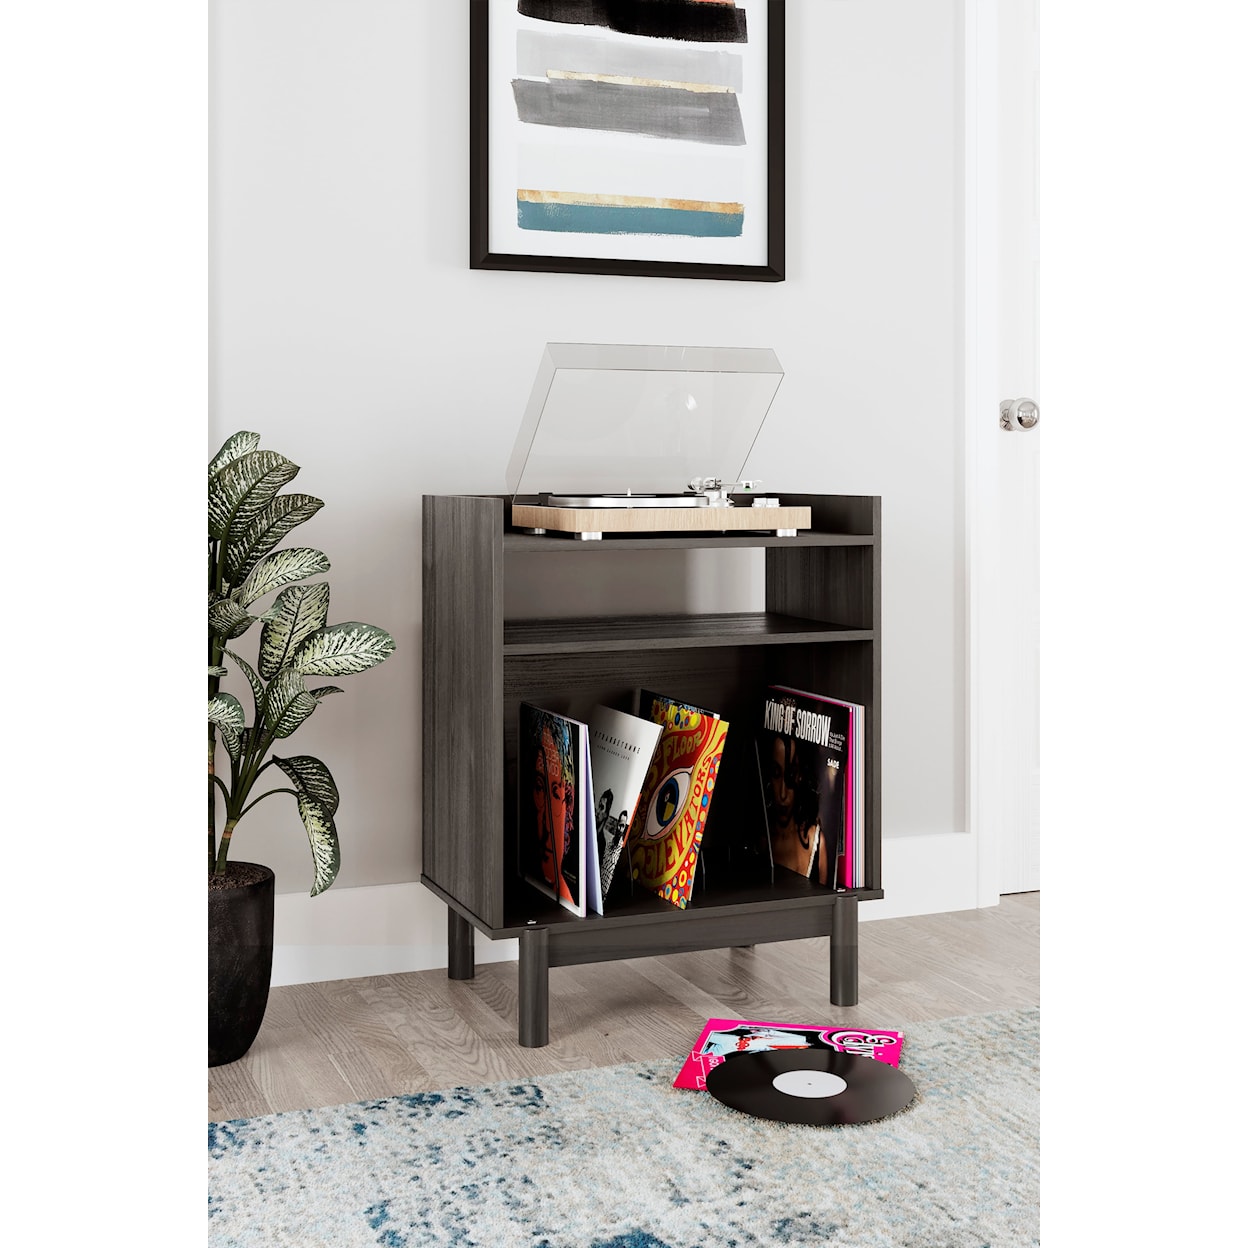 Benchcraft Brymont Turntable Accent Console